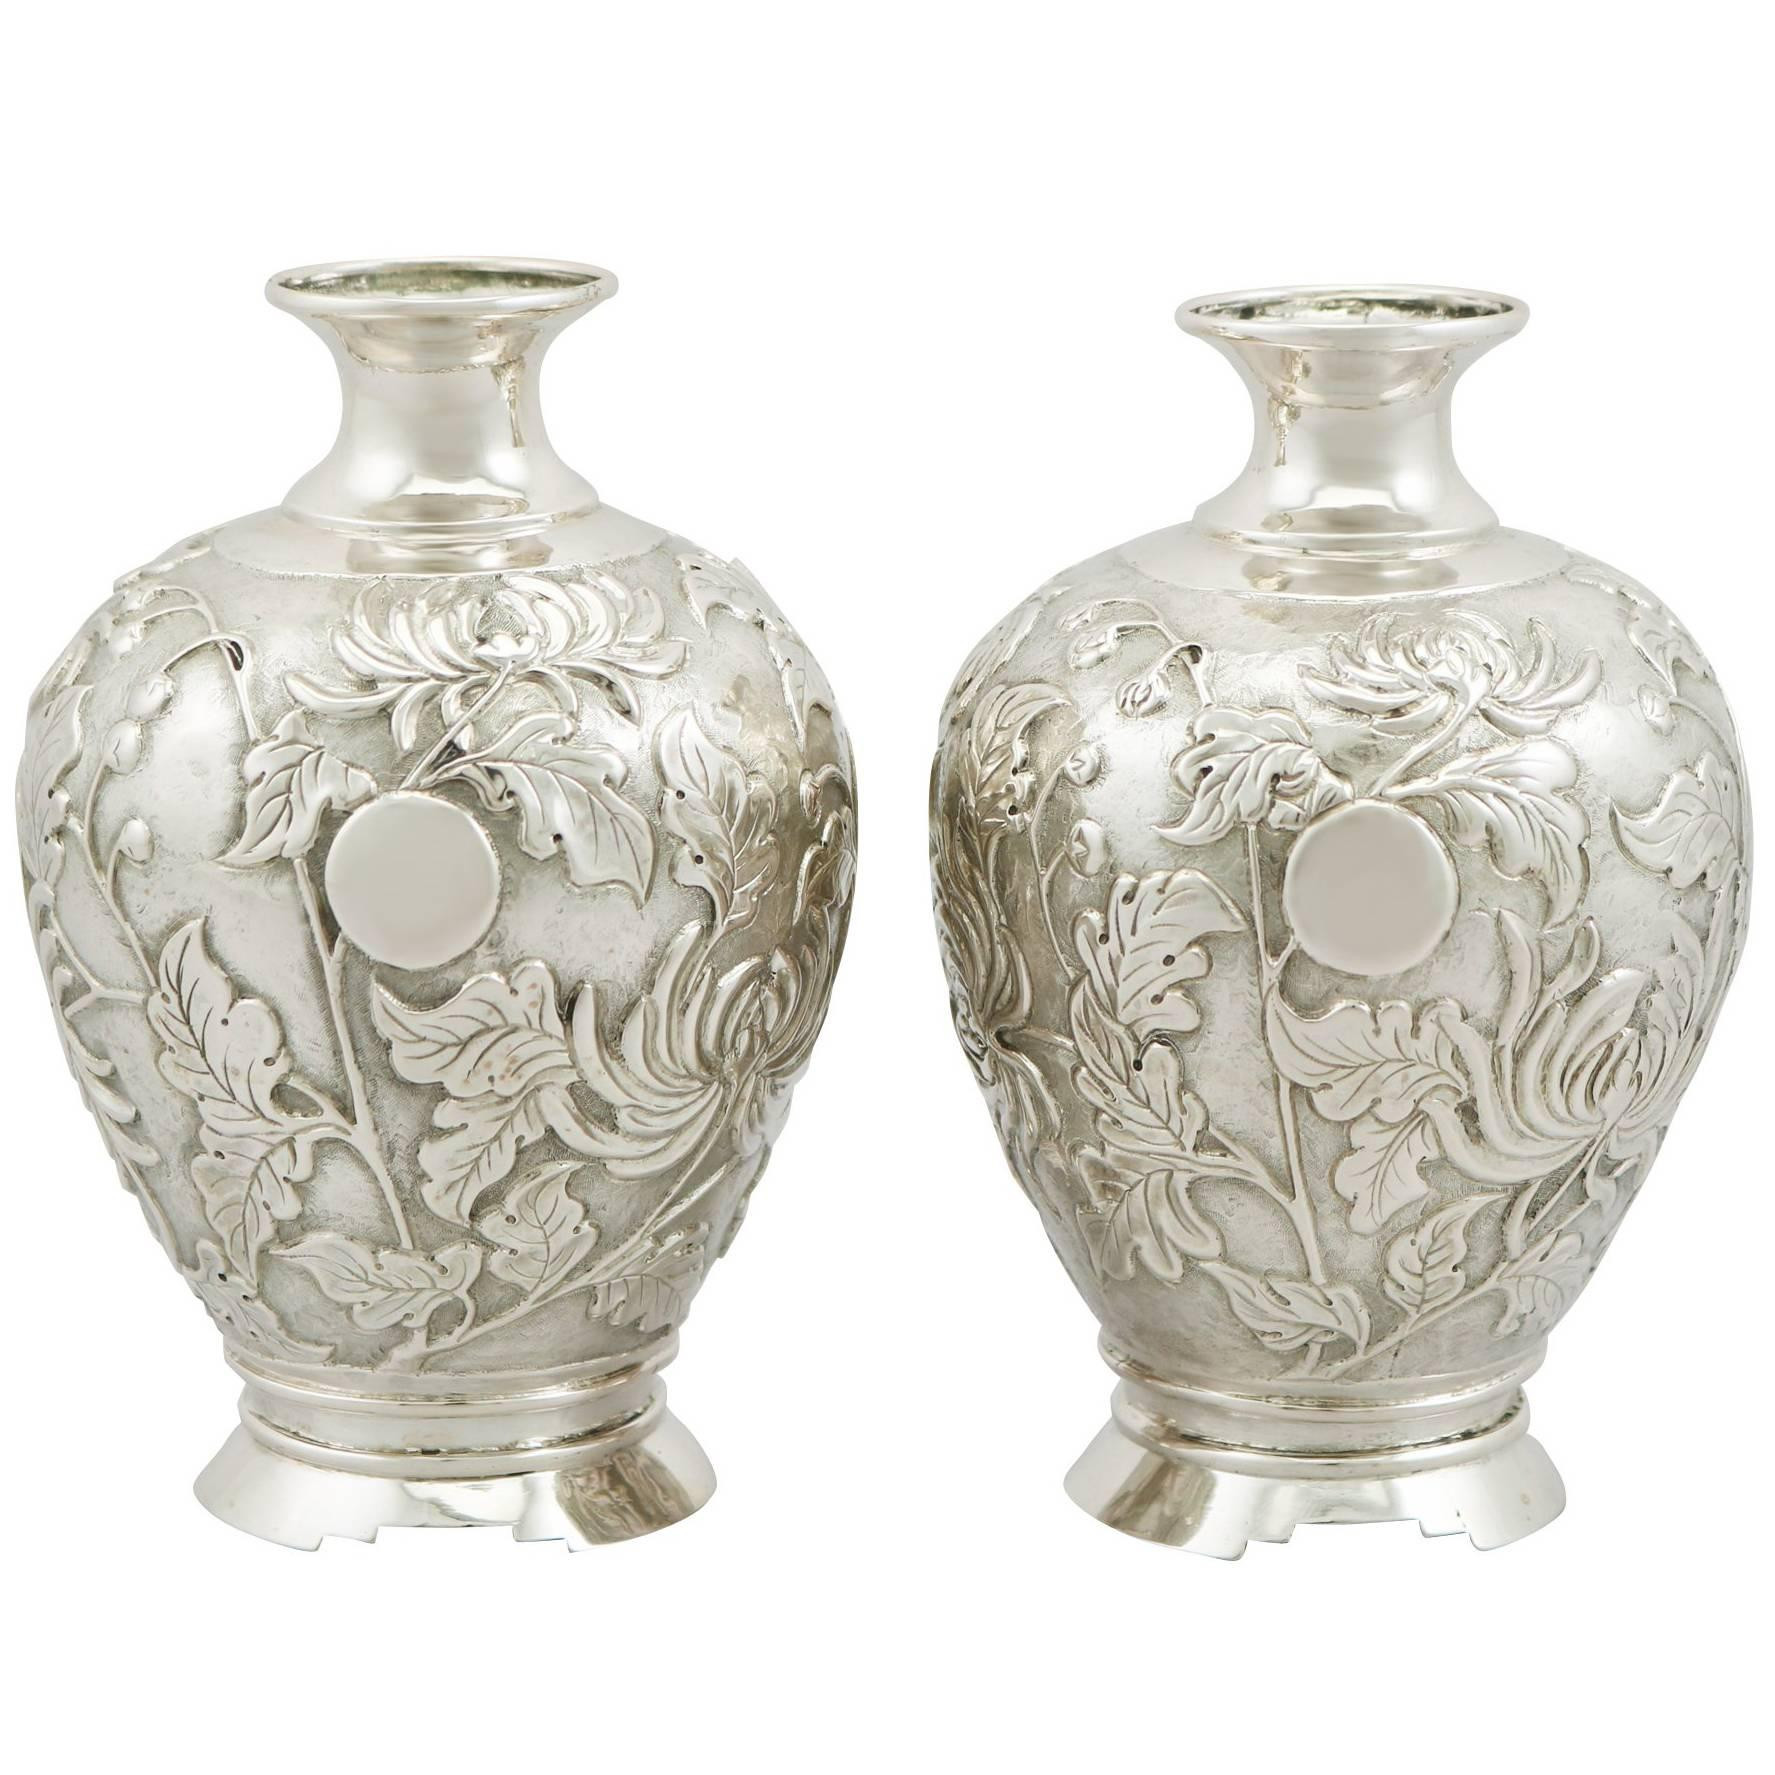 12 Perfect Antique Silver Vases for Sale 2024 free download antique silver vases for sale of achaemenid revival repoussa silver vase persia circa 1900 for sale regarding achaemenid revival repoussa silver vase persia circa 1900 for sale at 1stdibs